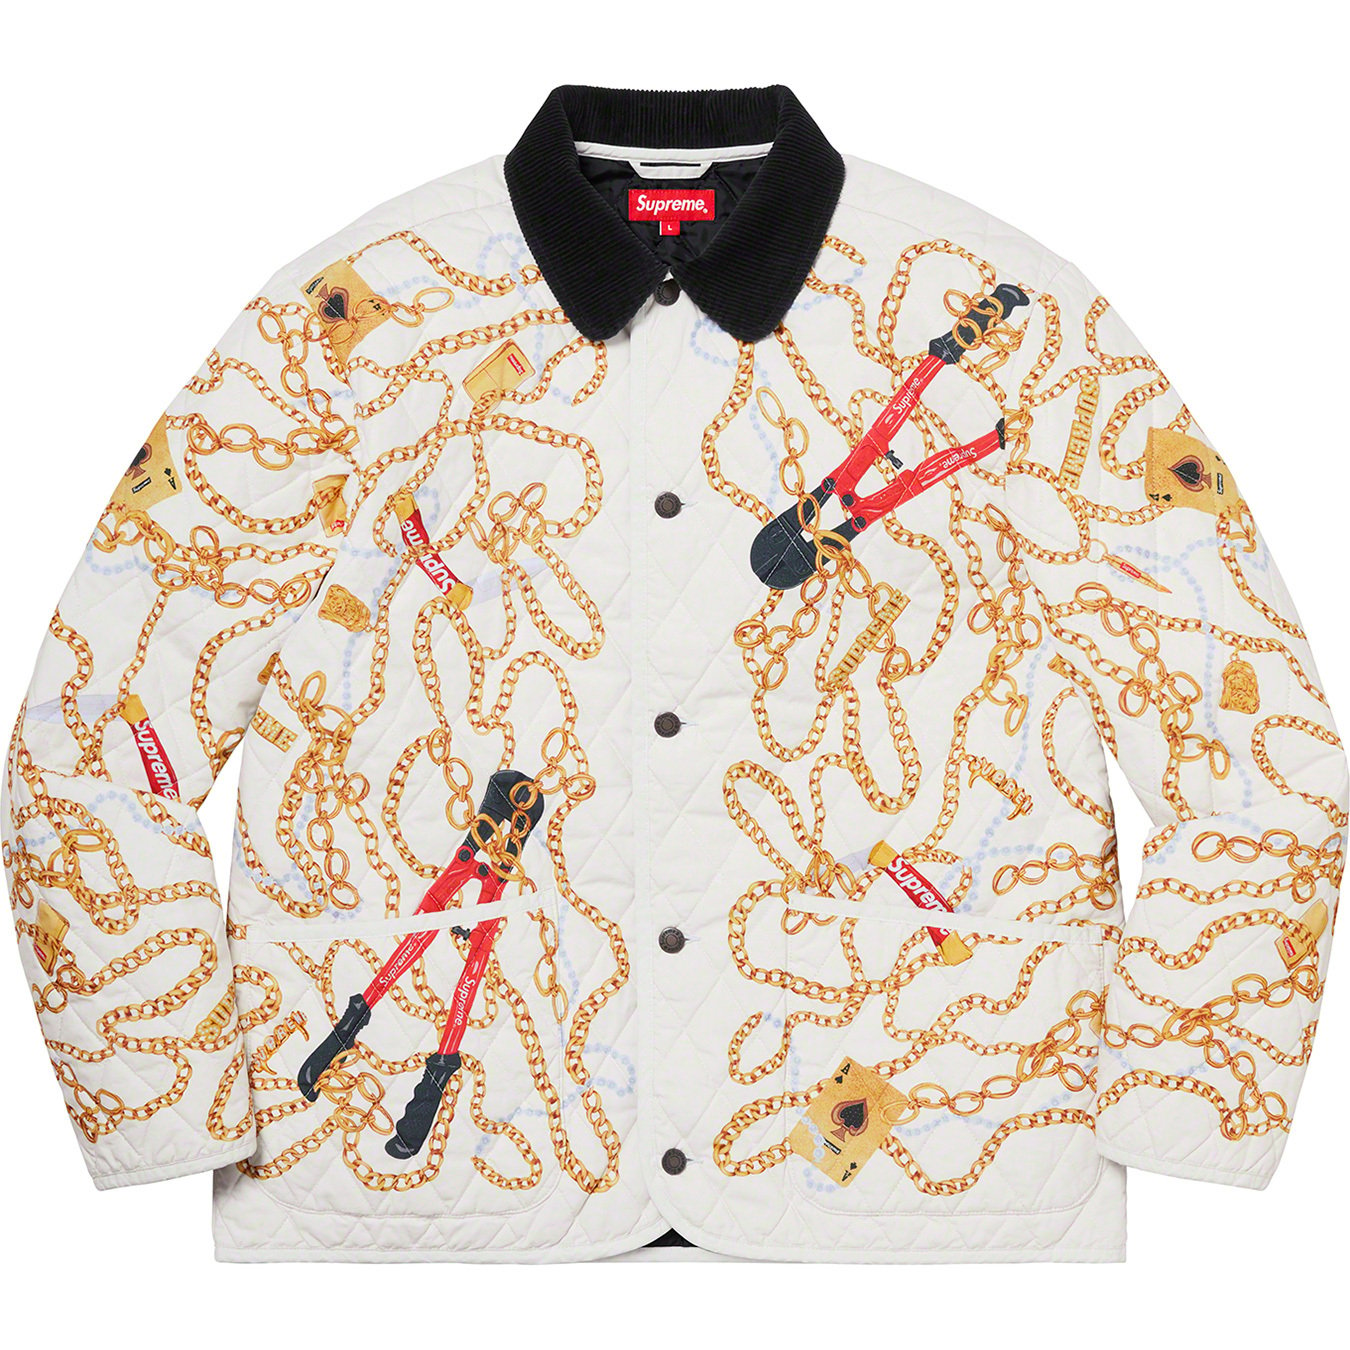 Chains Quilted Jacket - Supreme Community